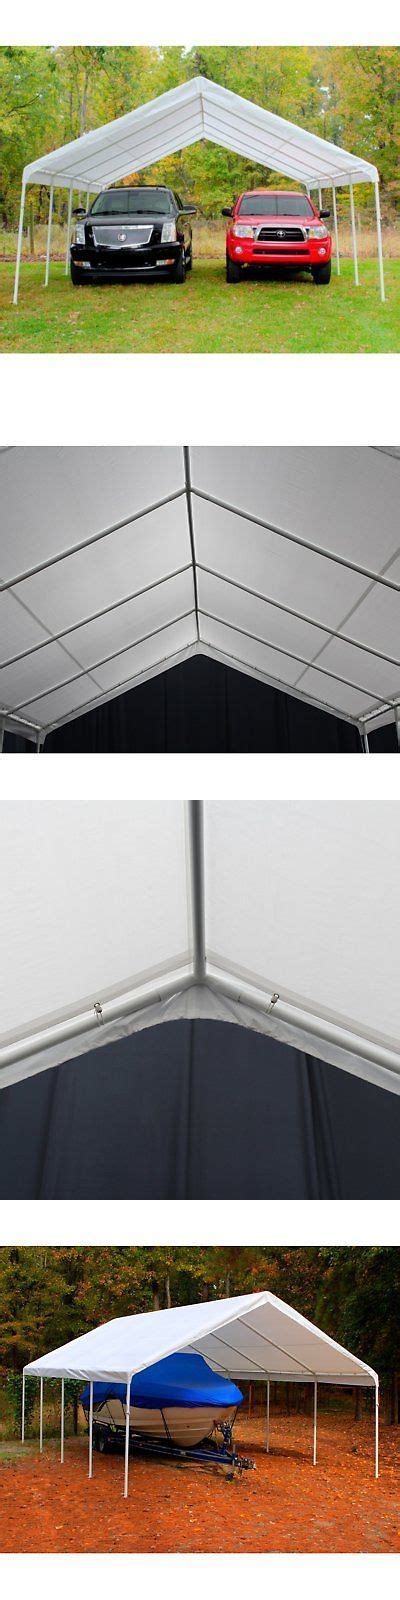 awnings  canopies  king canopy hercules    ft canopy white    buy